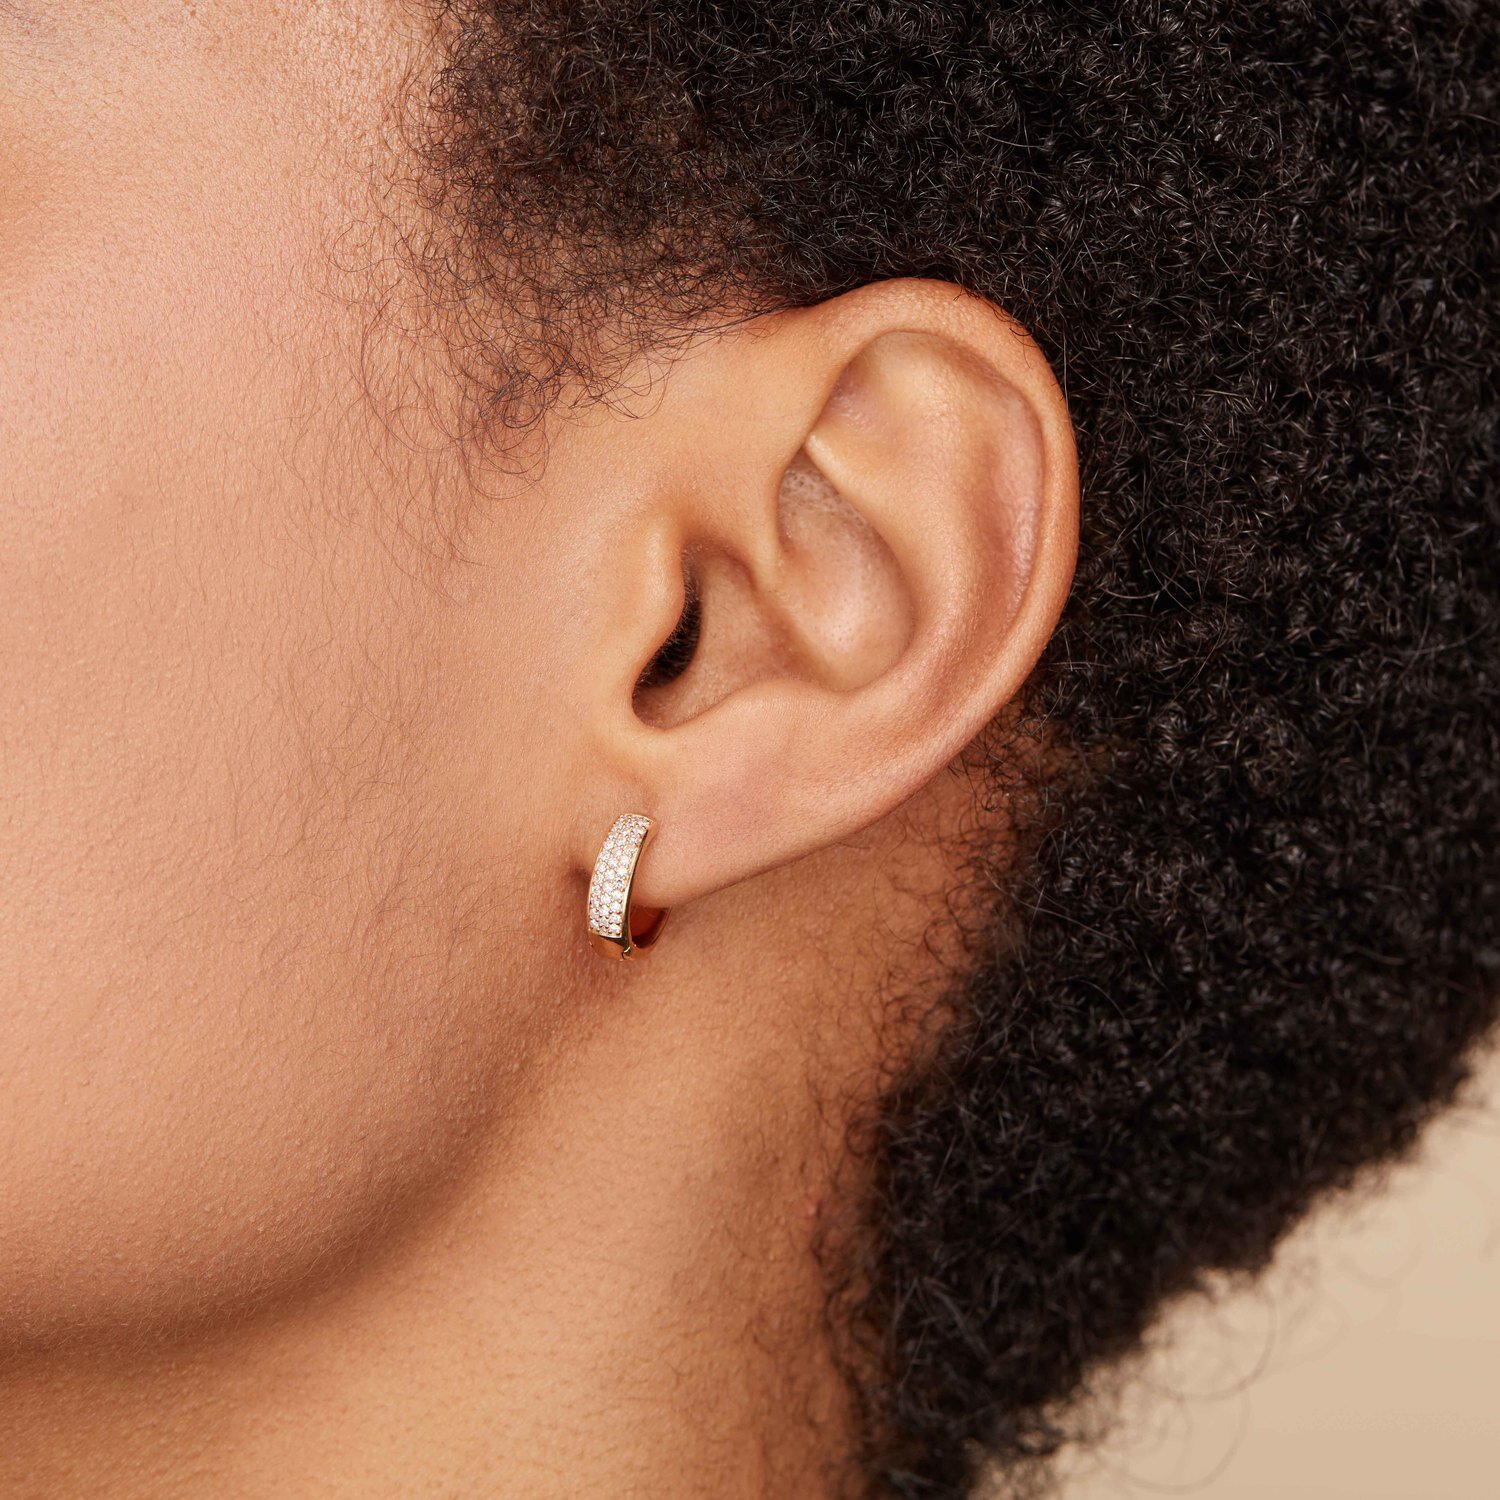 Pave_earring_gold_onfig1.jpg